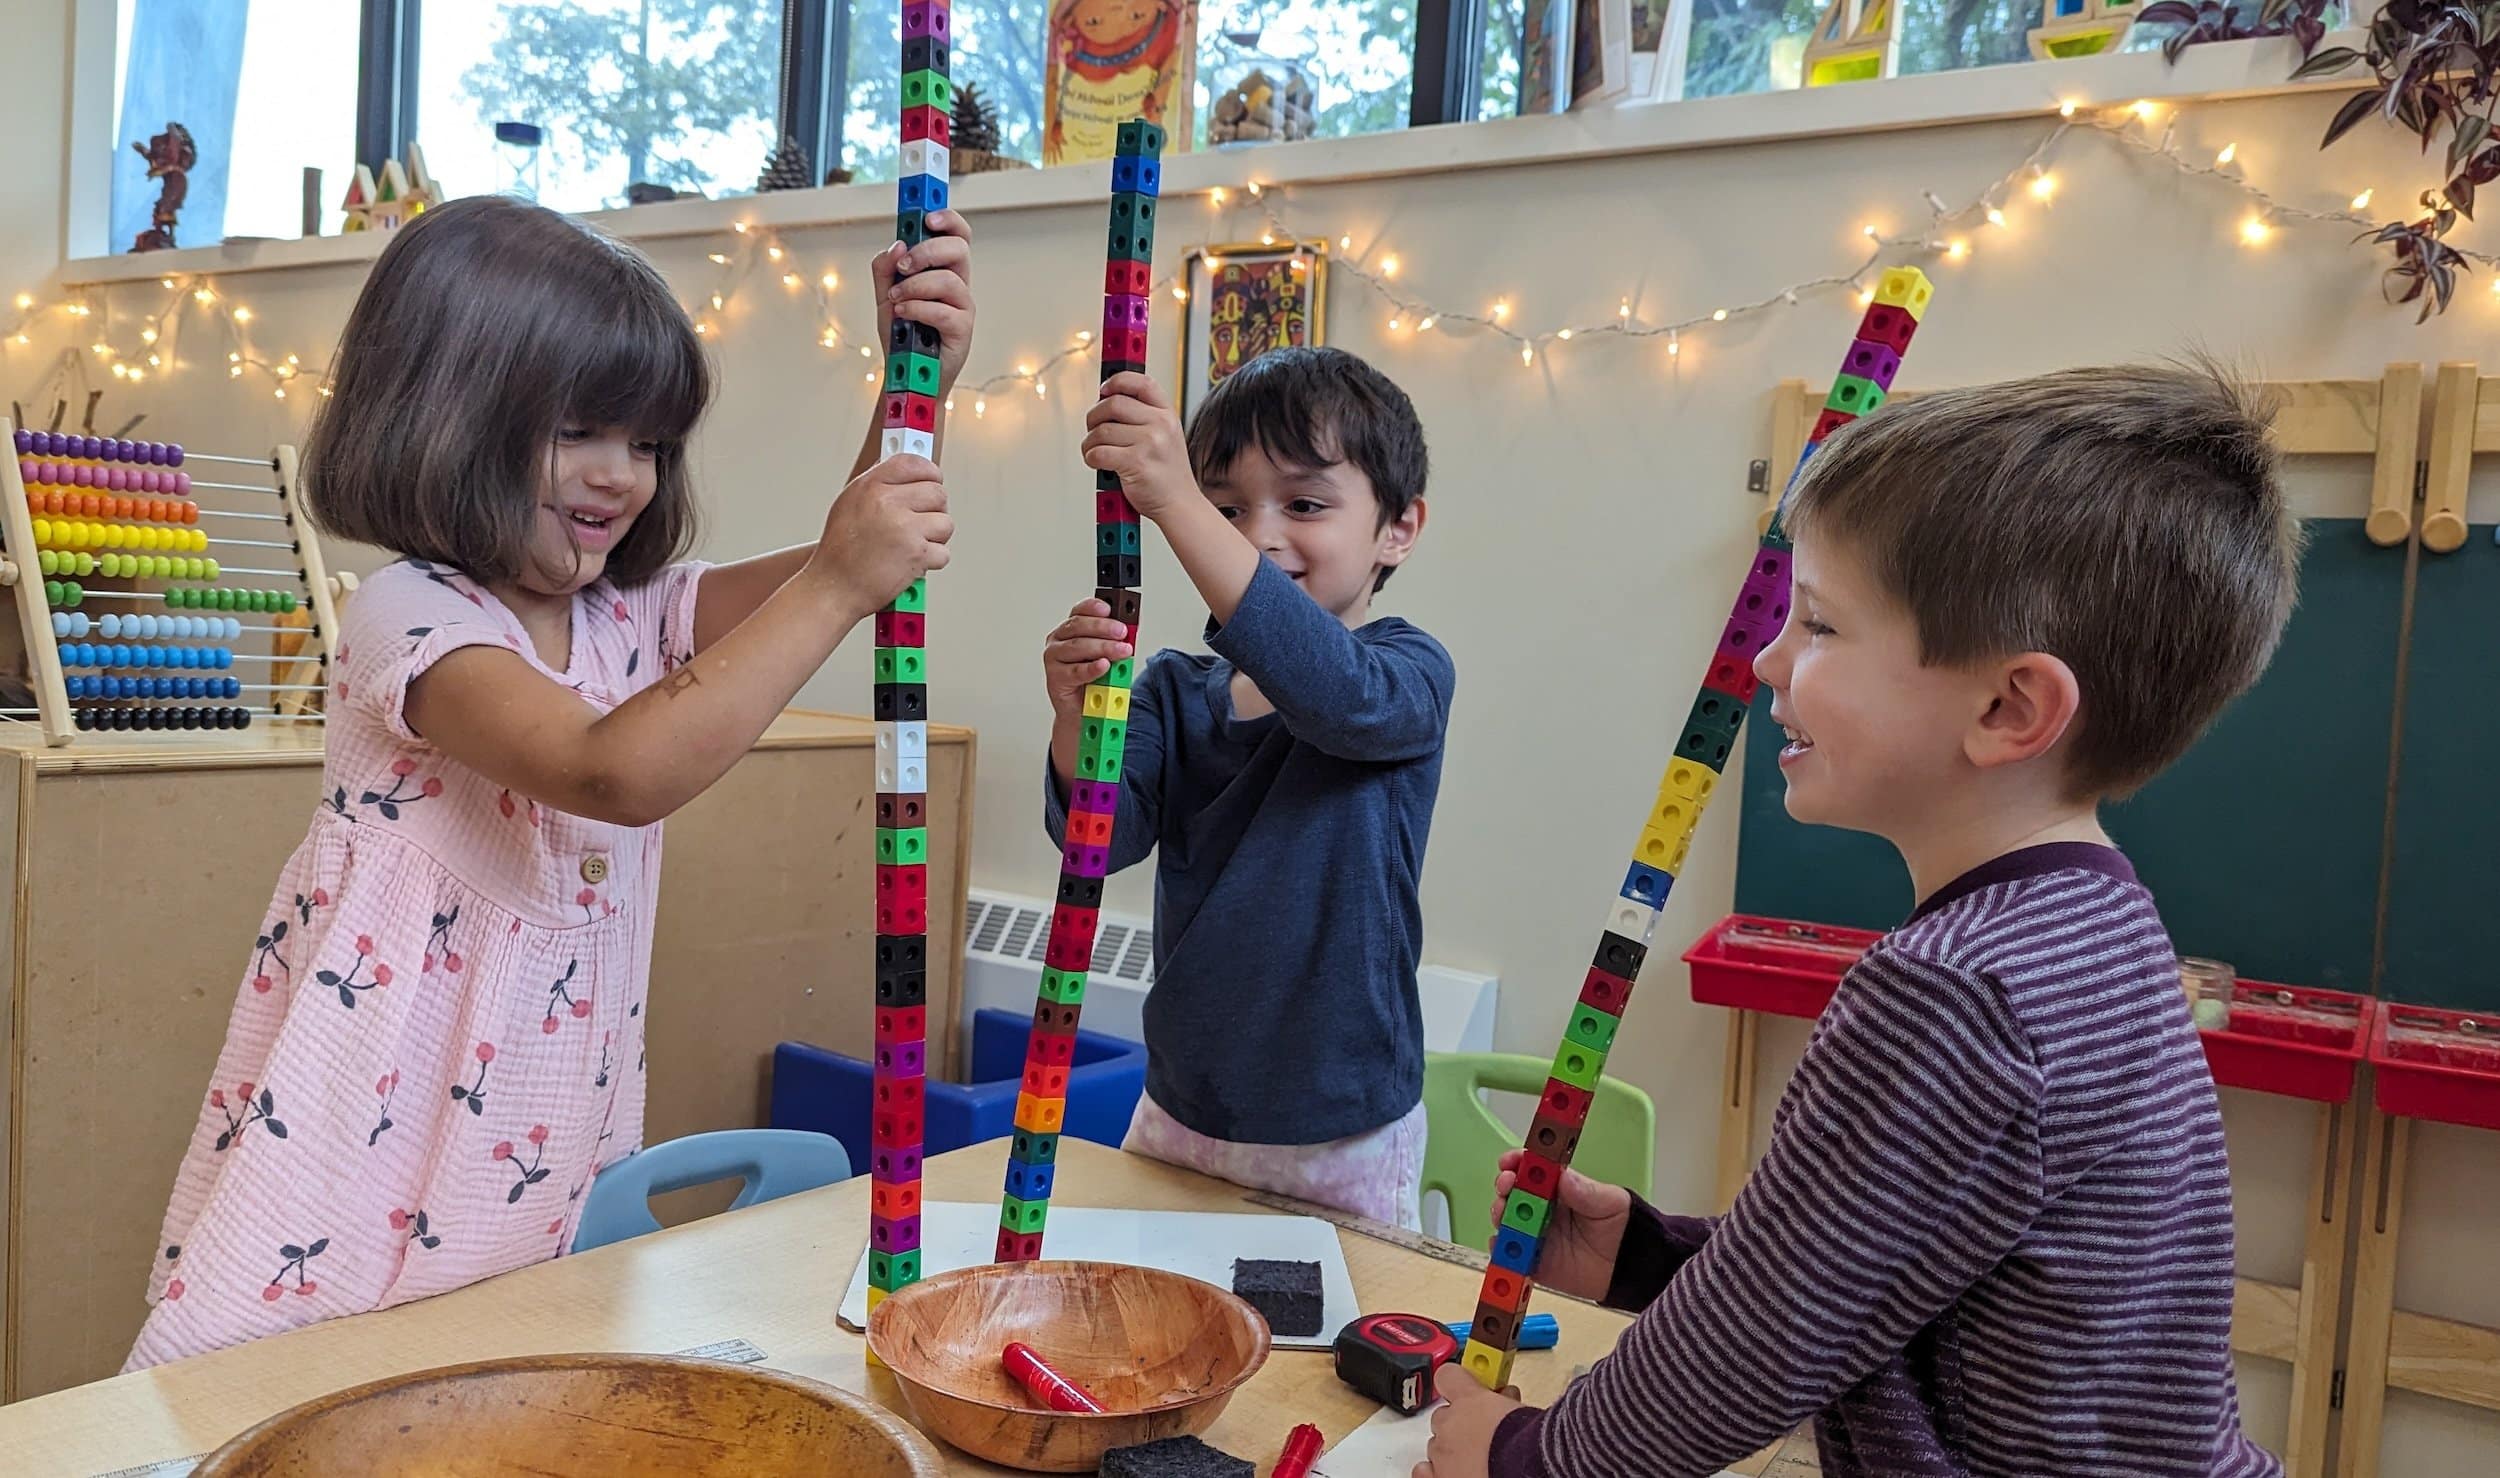 Students-build-towers-with-colorful-blocks